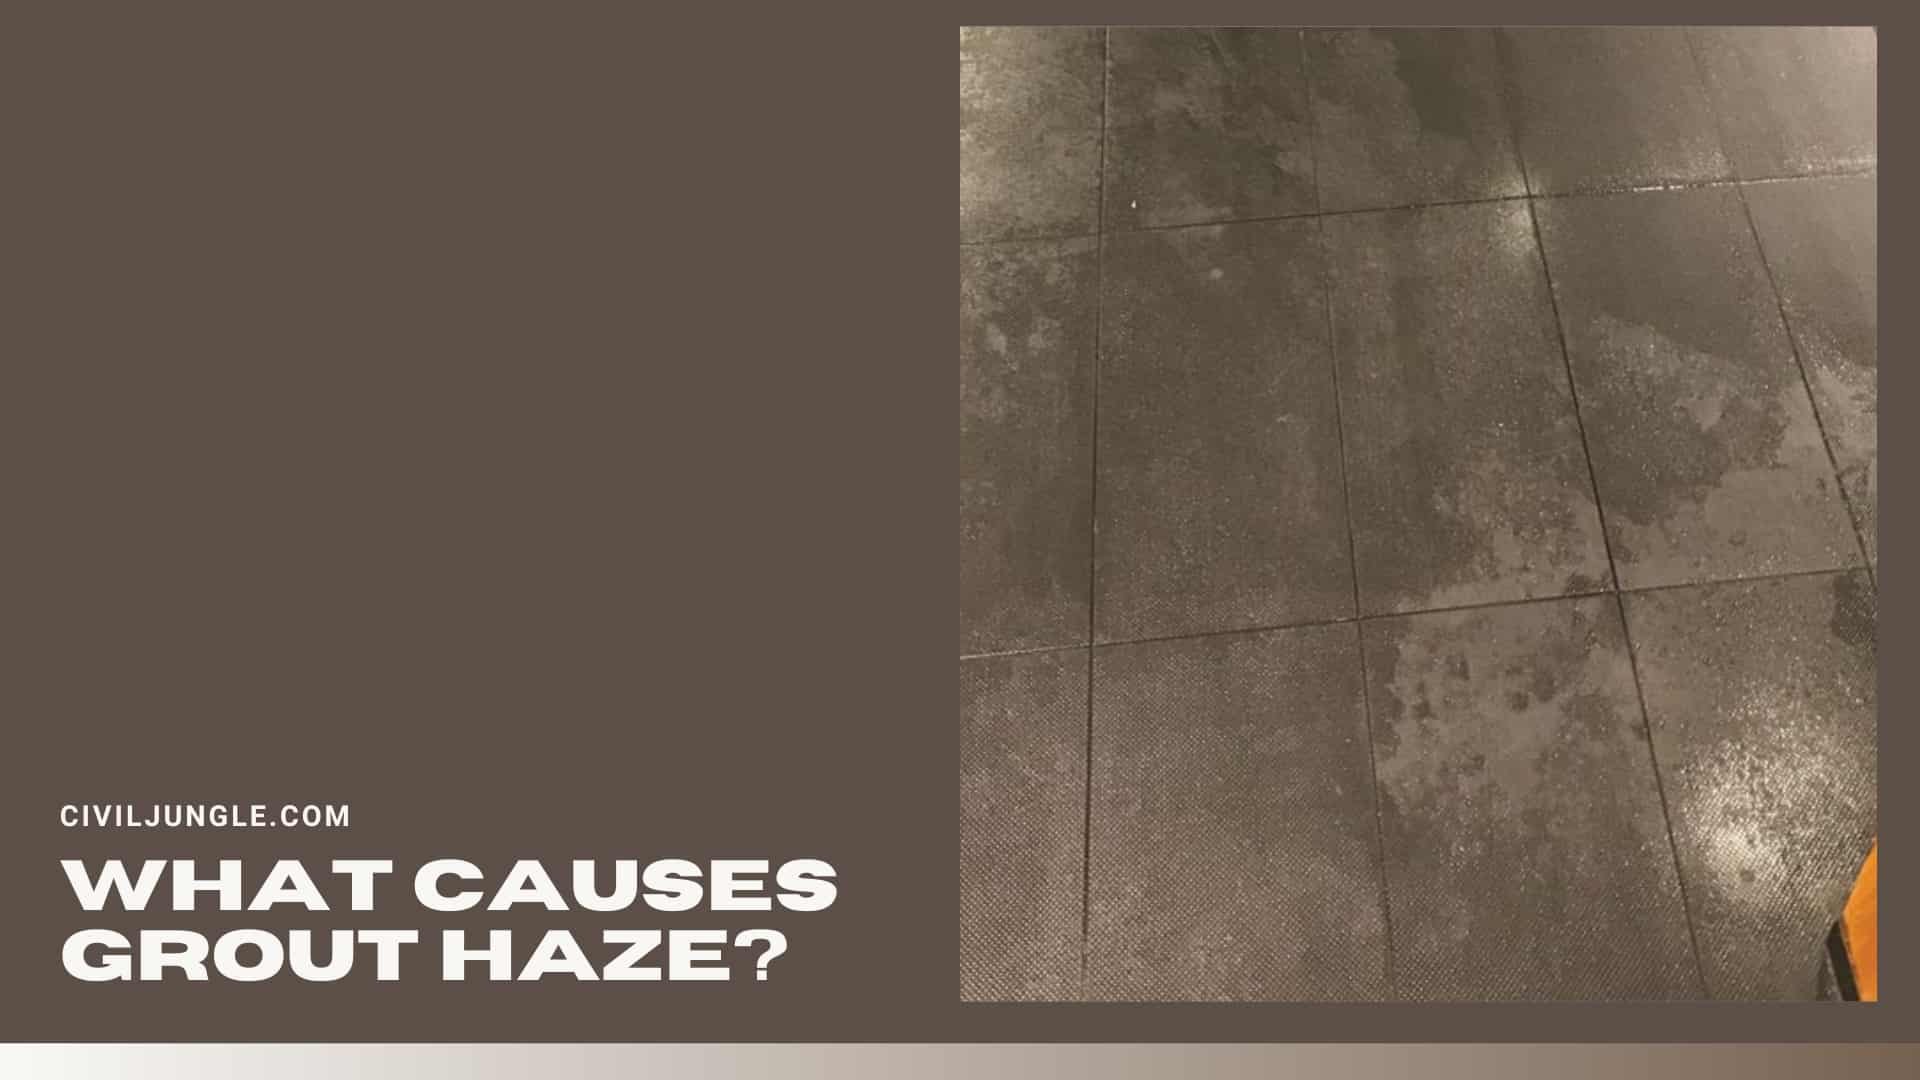 What Causes Grout Haze?